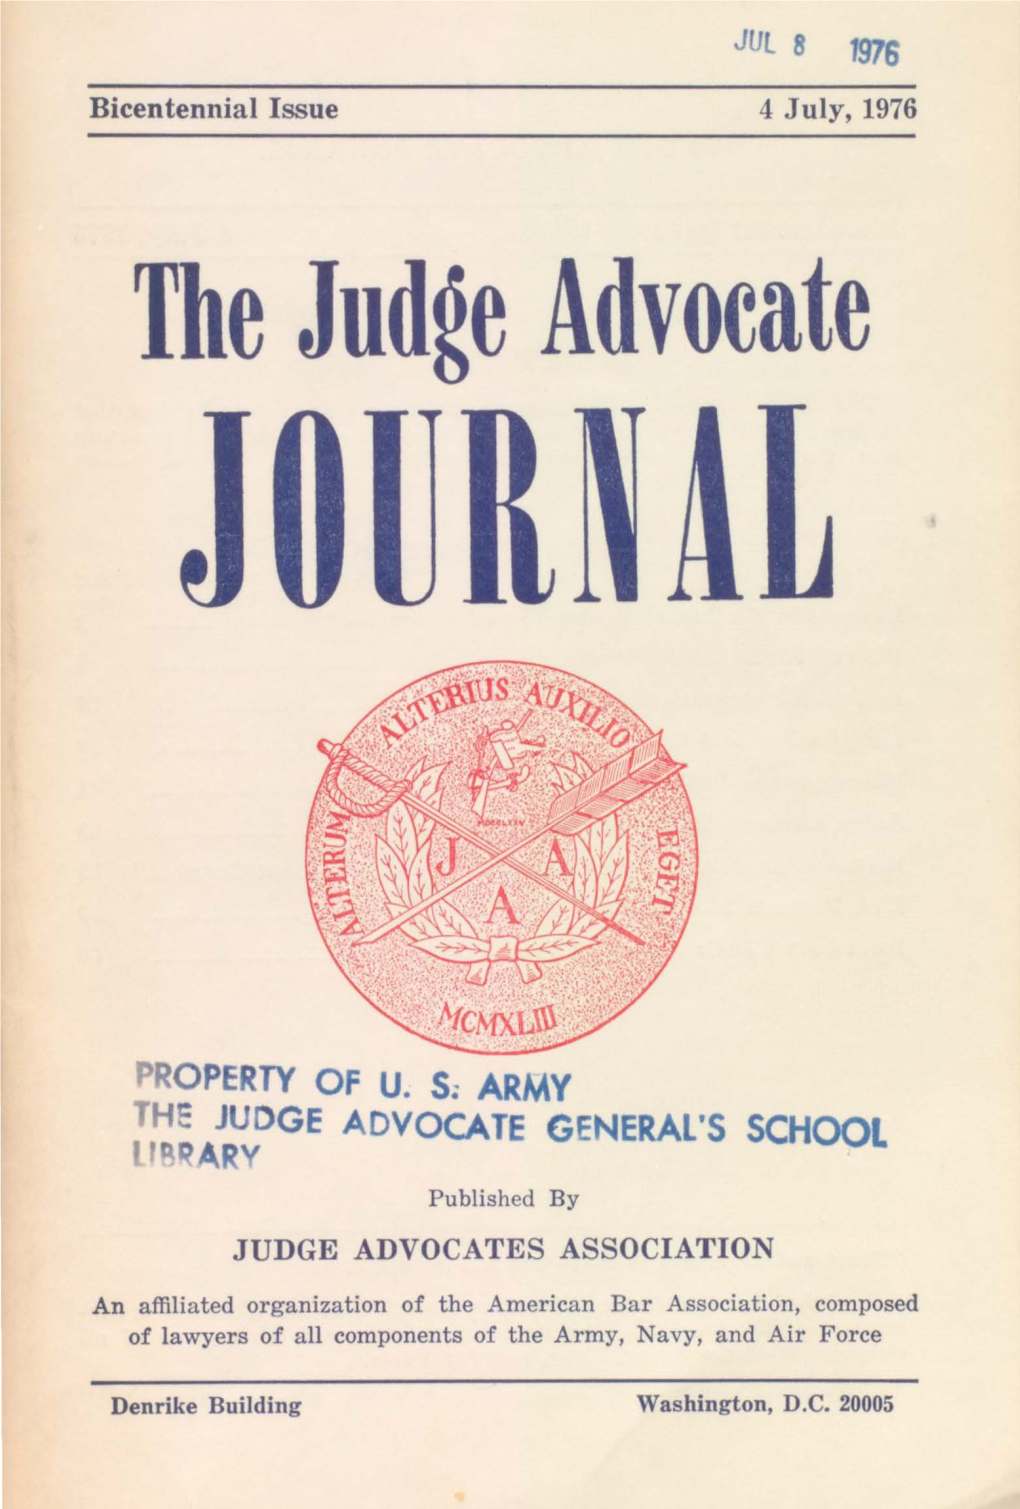 The Judge Advocate Journal, Bicentennial Issue, 4 July, 1976